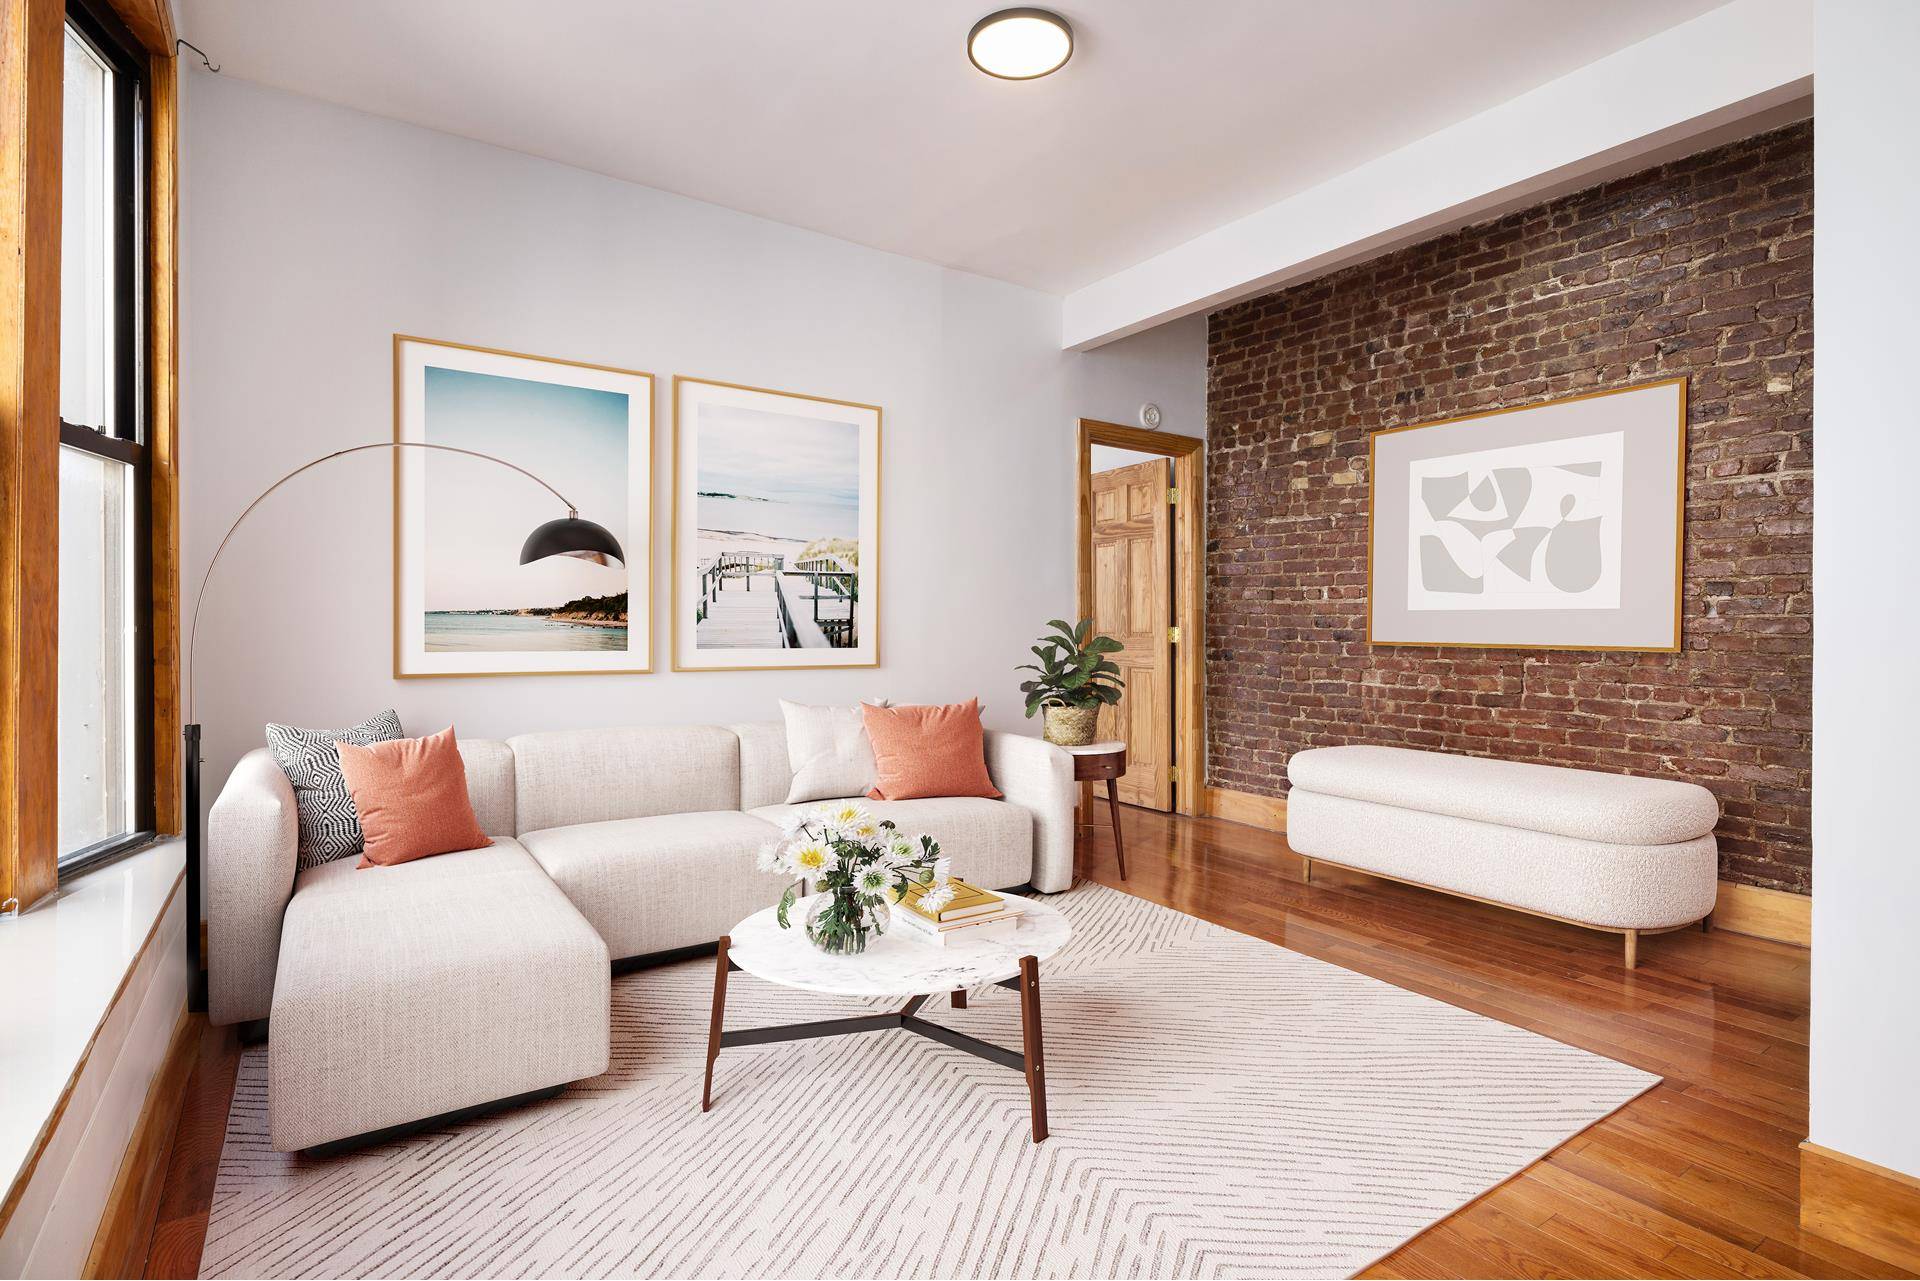 NO BOARD APPROVAL SPONSOR SALE RENOVATED TOP FLOOR WITH HUDSON RIVER amp ; OPEN SKY VIEWS.